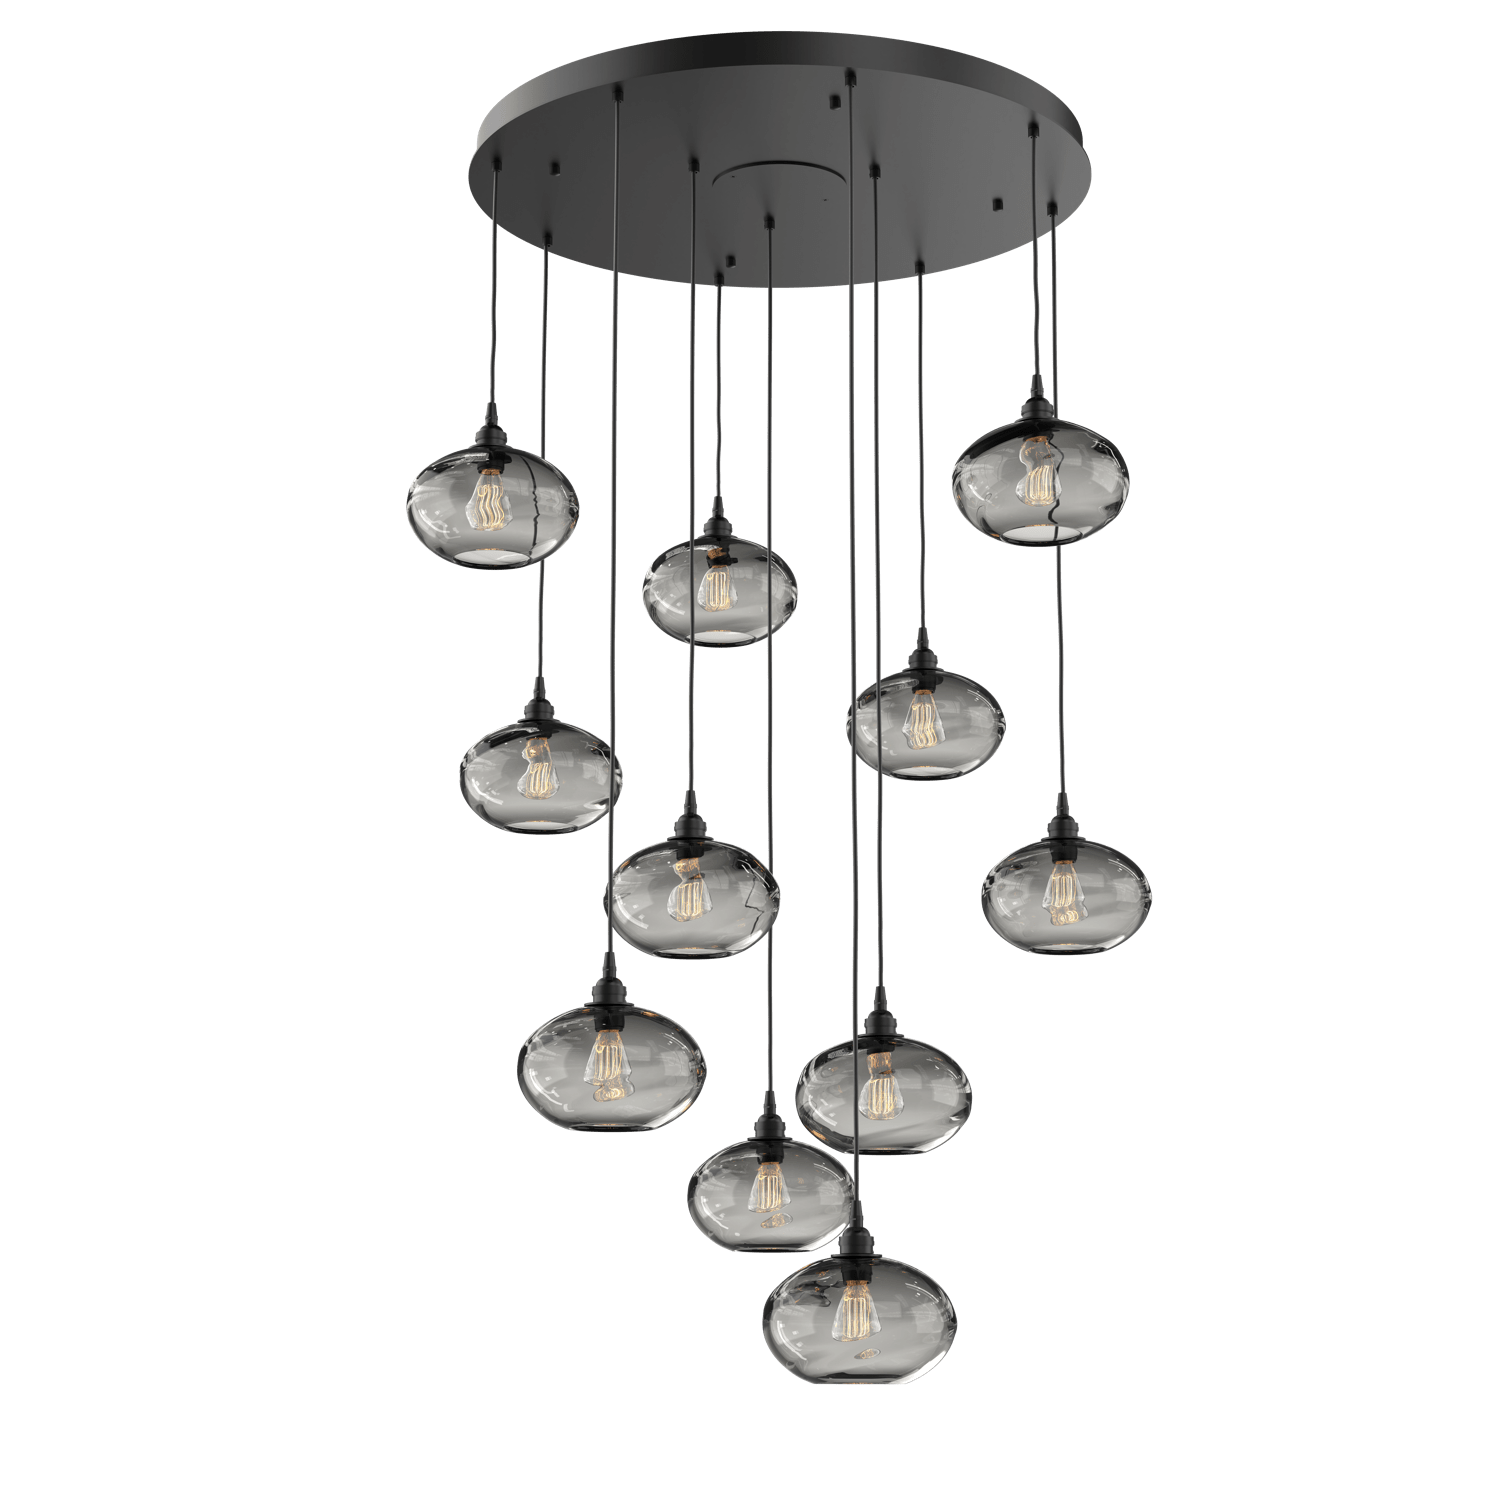 CHB0036-11-MB-OS-Hammerton-Studio-Optic-Blown-Glass-Coppa-11-light-round-pendant-chandelier-with-matte-black-finish-and-optic-smoke-blown-glass-shades-and-incandescent-lamping